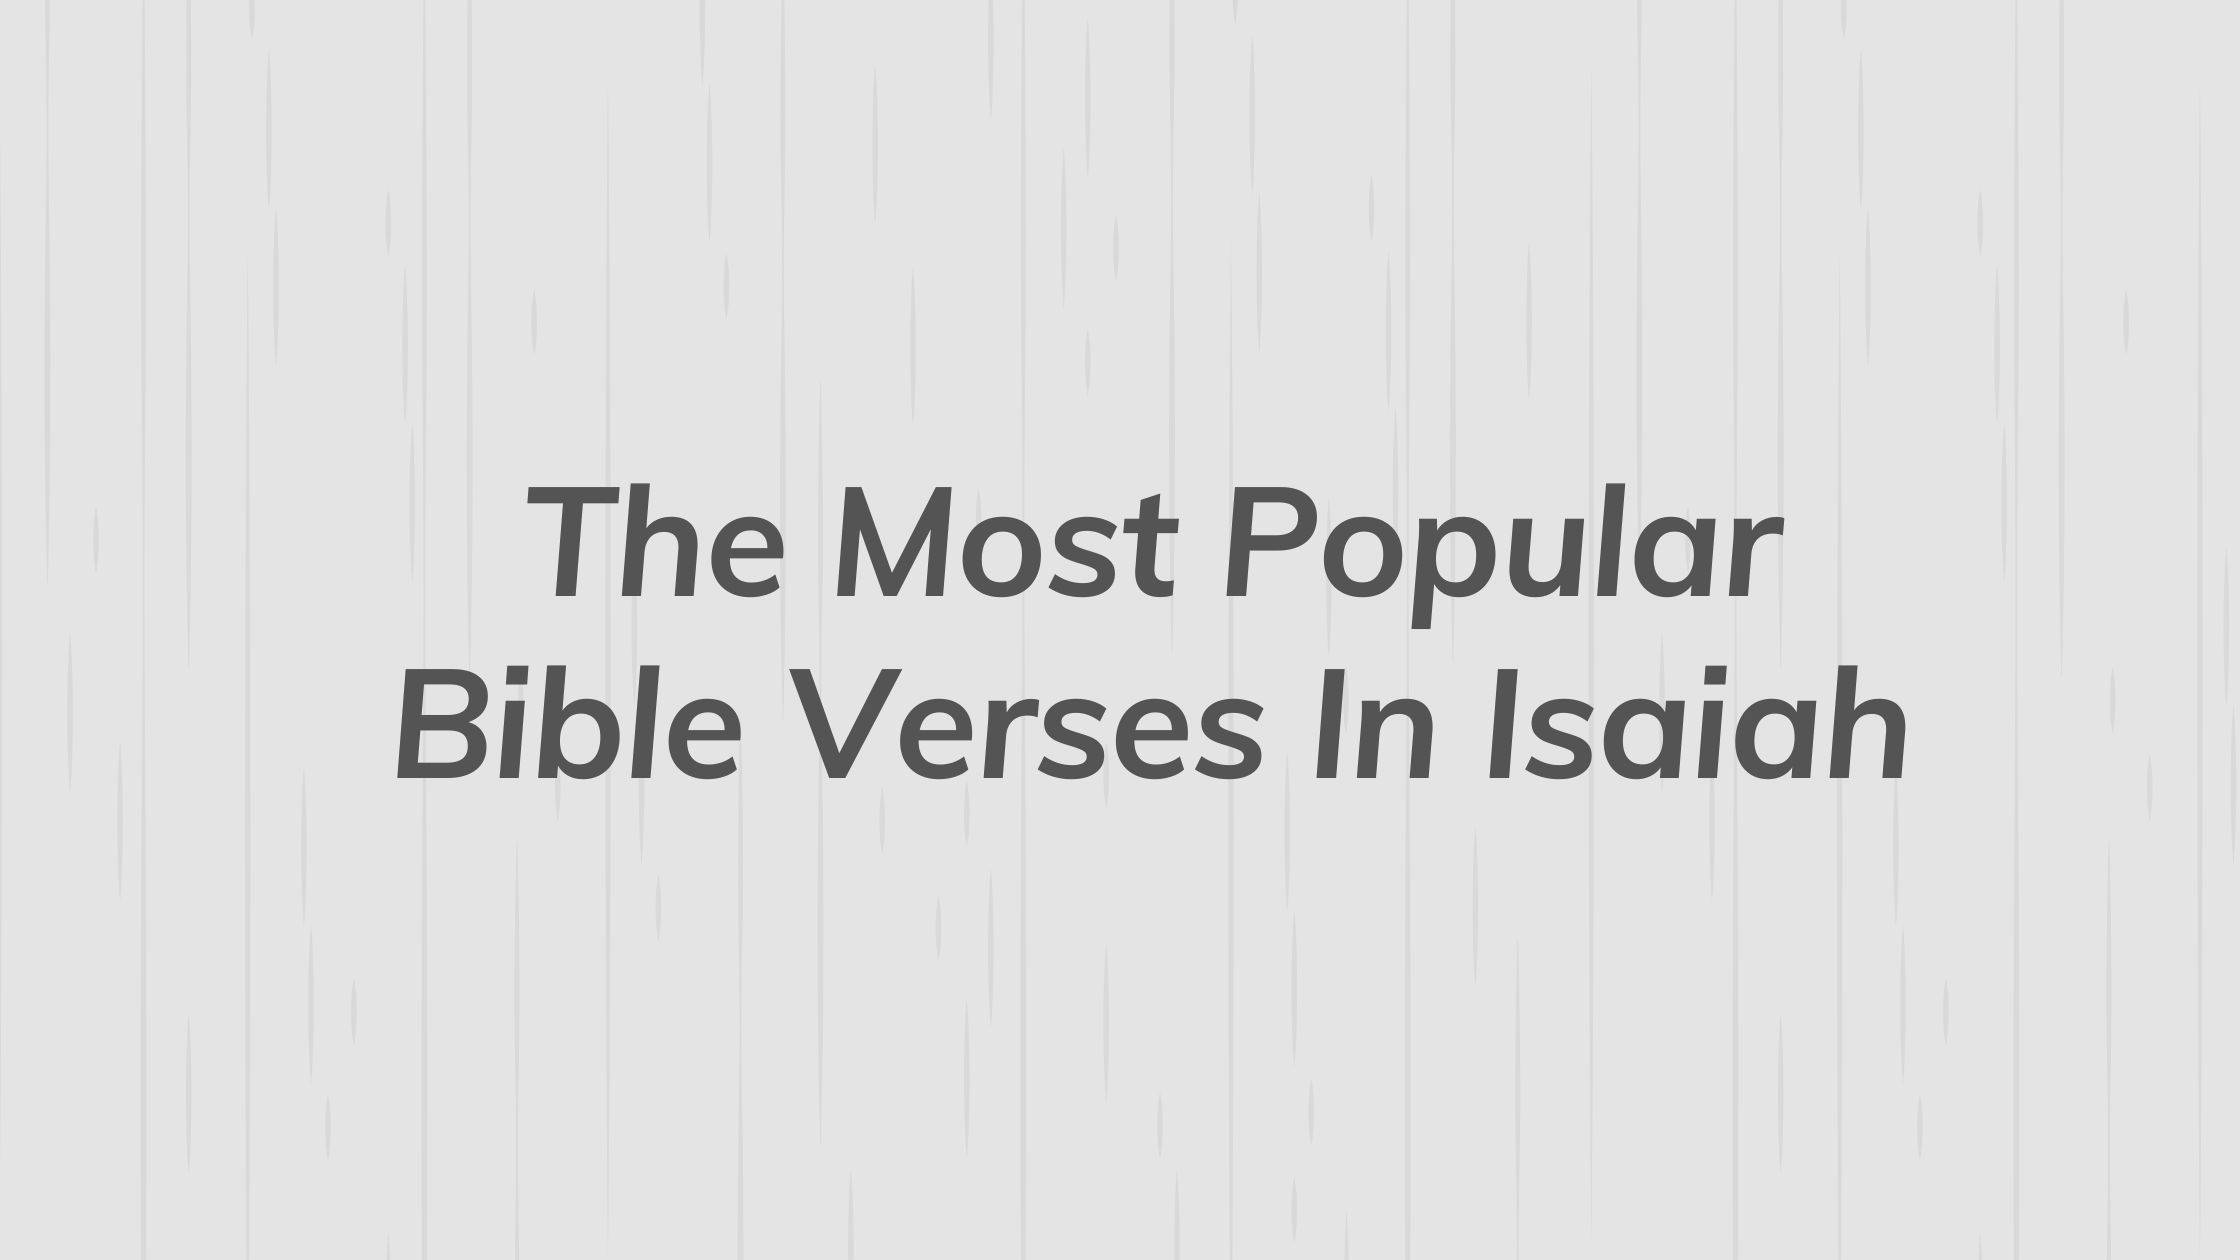 The Most Popular Bible Verses In Isaiah